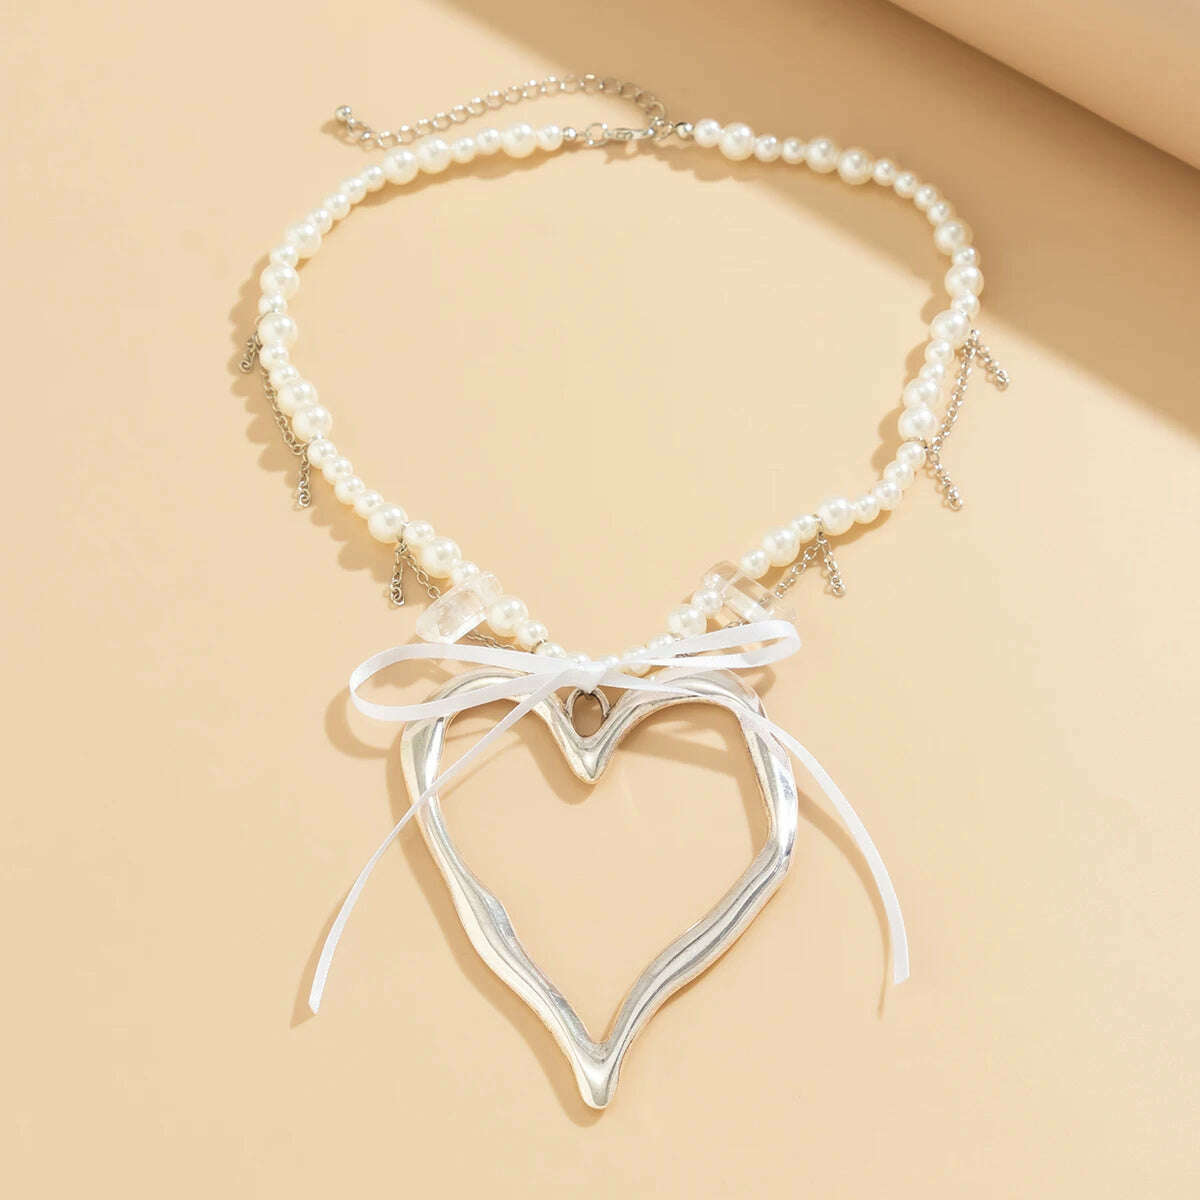 KIMLUD, Exaggerated Big Hollow Love Heart Pendant Choker Necklace for Women Elegant Bowknot Imitation Pearl Chain Y2K Wed Jewelry Gift, KIMLUD Womens Clothes